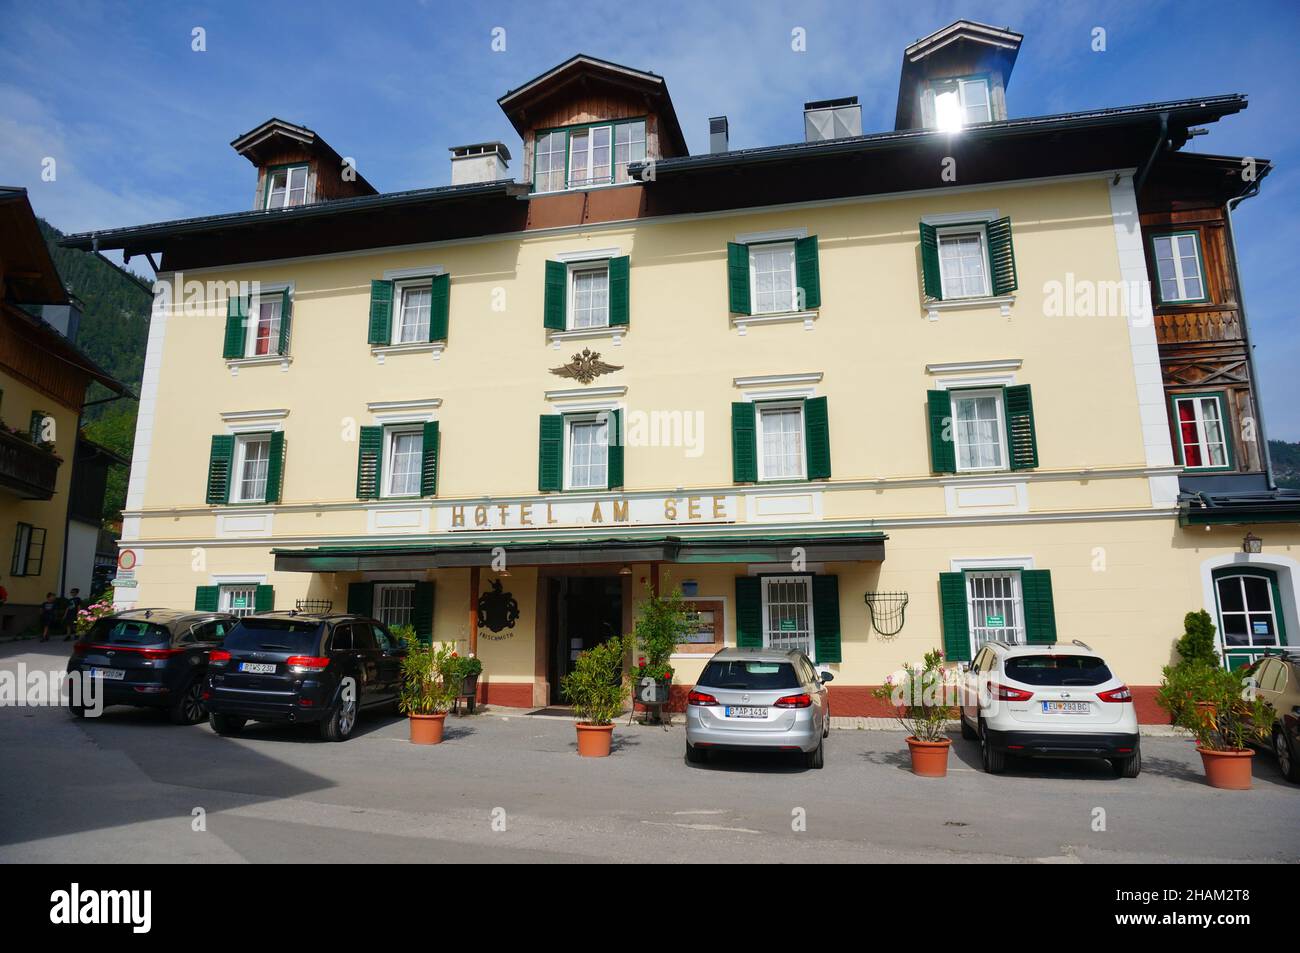 AULTAUSSEE, AUSTRIA - Nov 07, 2021: The parked cars in front of the Hotel Am See. Aultaussee, Austria Stock Photo